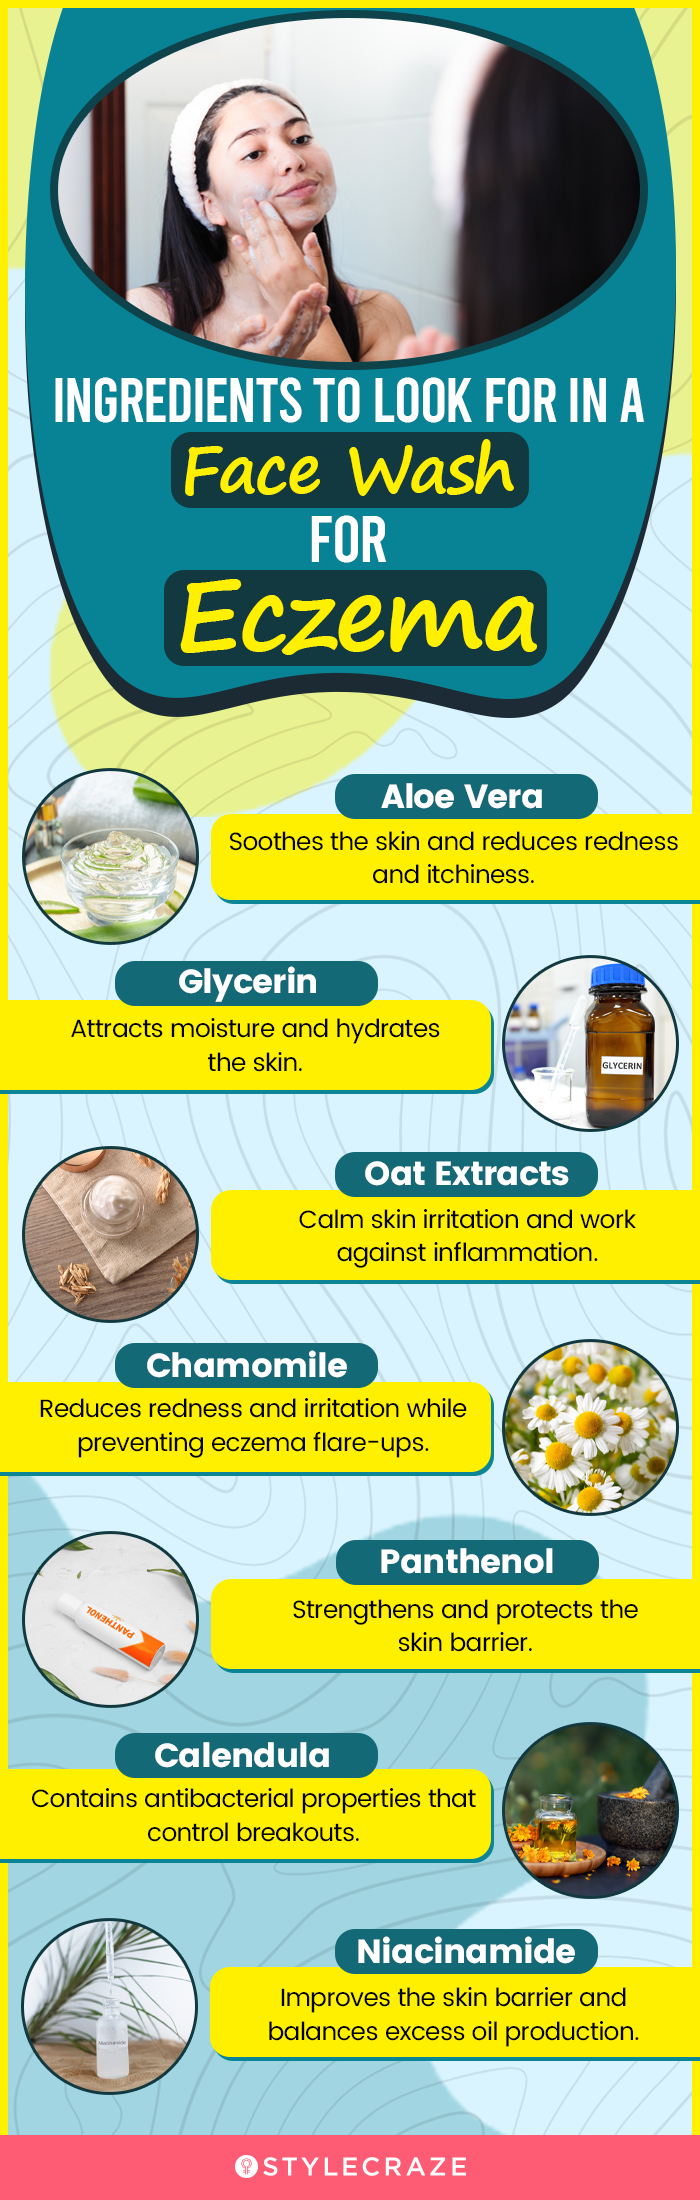 Ingredients To Look For In A Face Wash For Eczema (infographic)